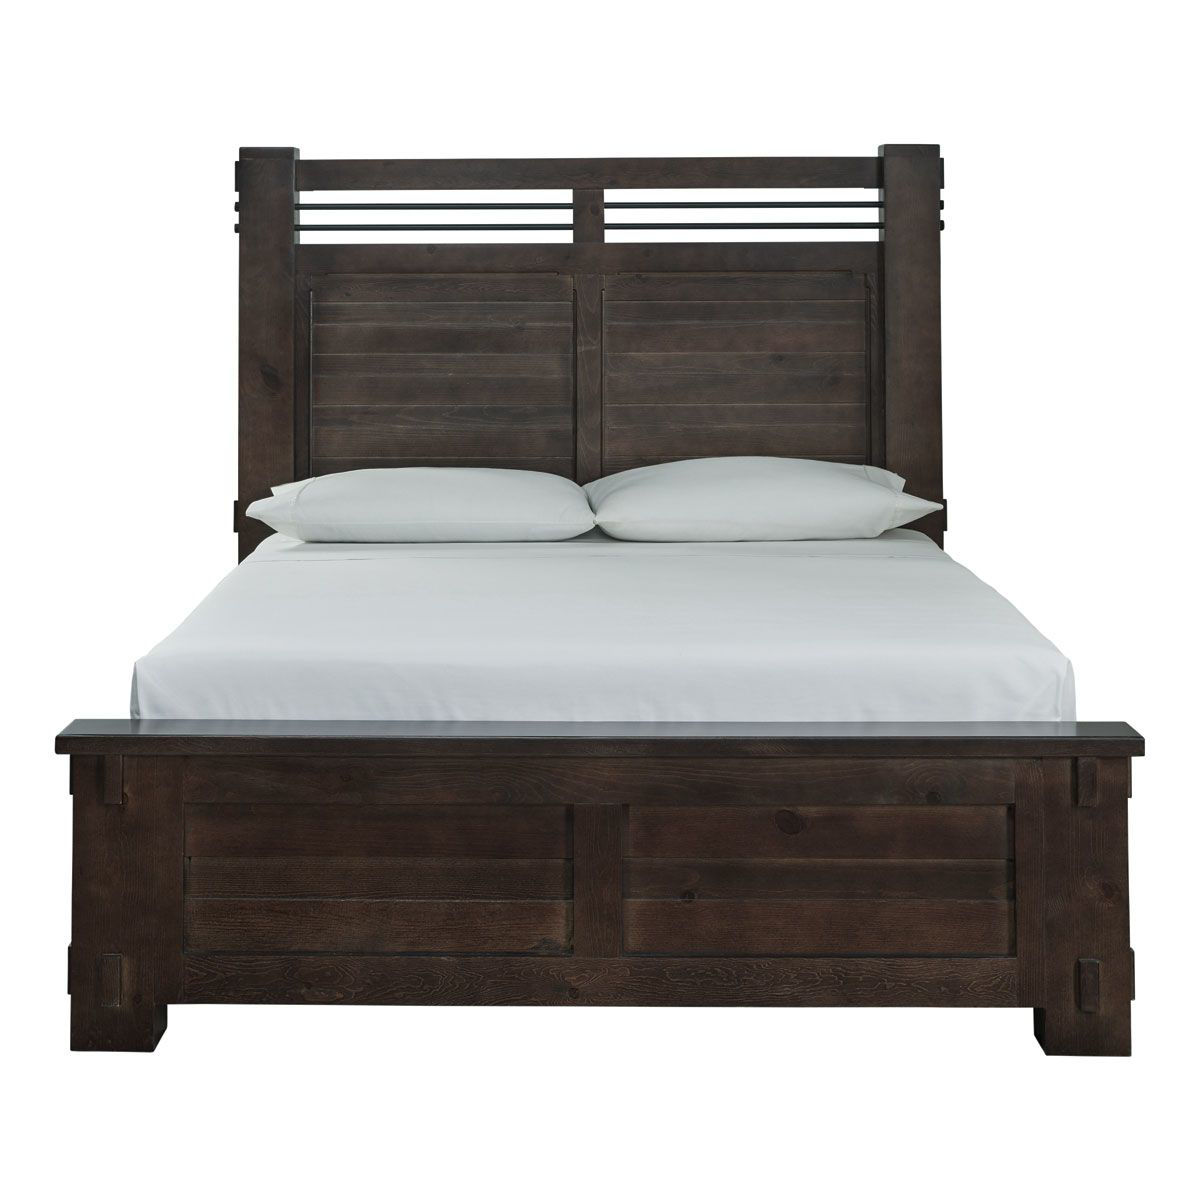 ARCHER COMPLETE KING BED | Badcock Home Furniture &more